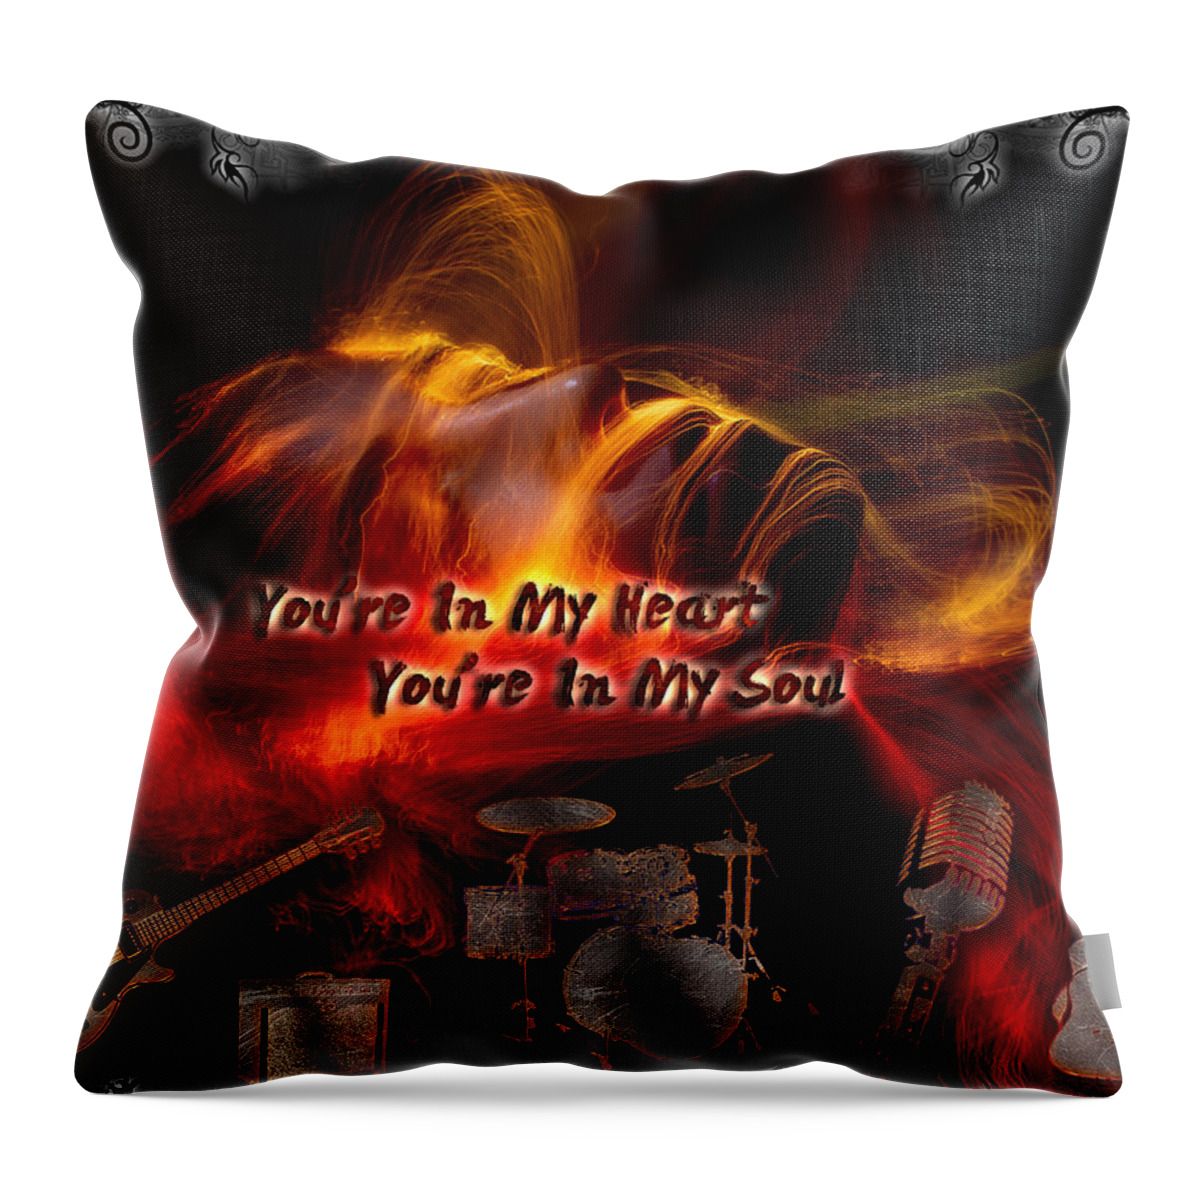 Rod Stewart Throw Pillow featuring the digital art Foot Loose And Fancy Free by Michael Damiani